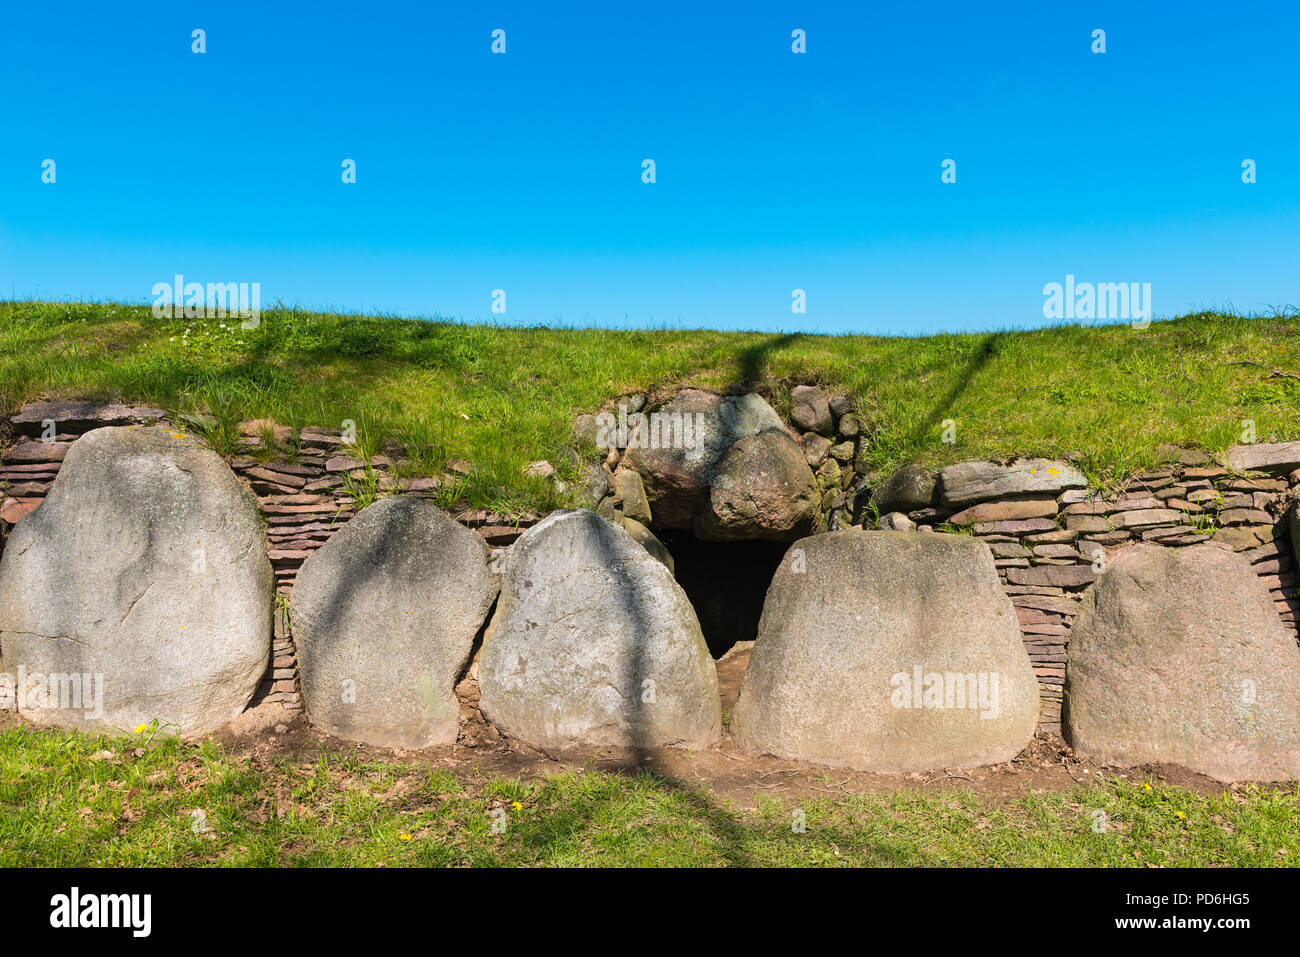 Burial site, entrance, stone age, about 2500 BC, passage tomb, archeological monument, Karlsminde, Waabs, Schwansen, Schleswig-Holstein, Germany, Stock Photo